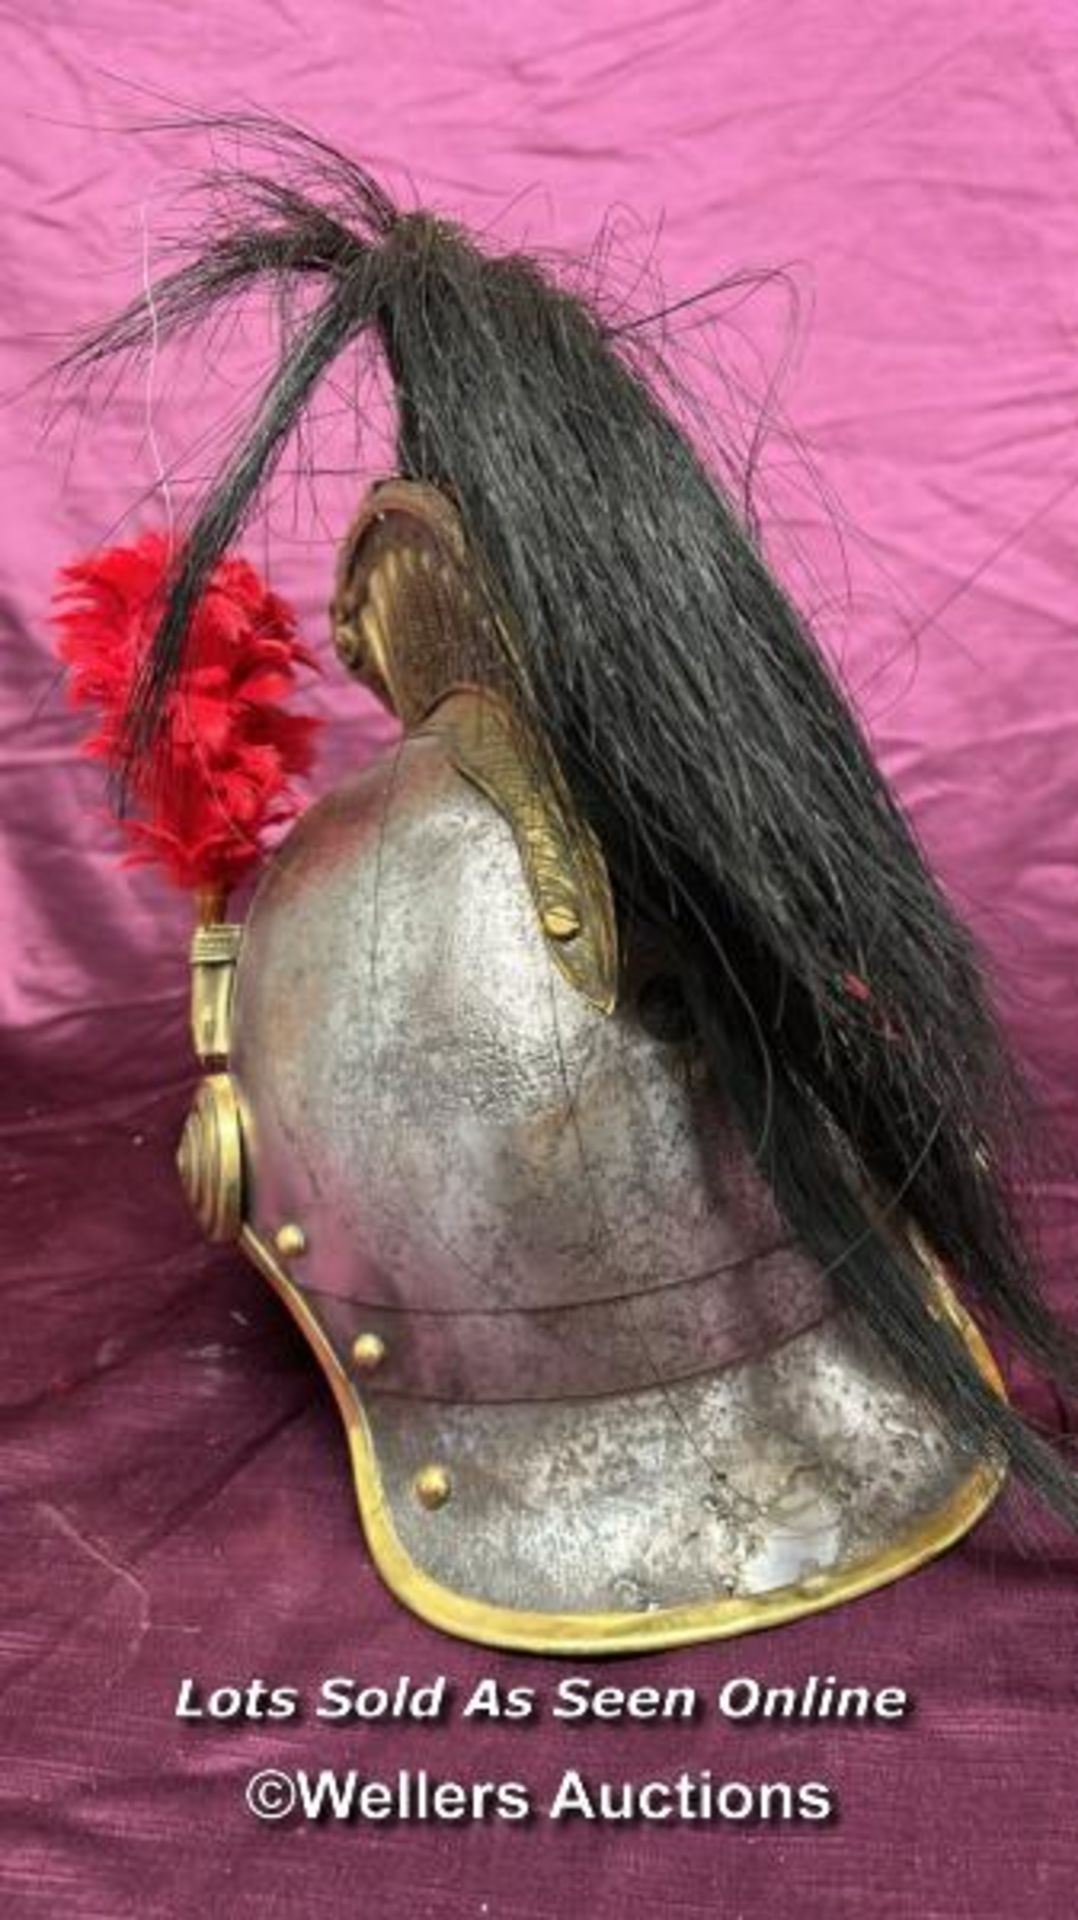 CIRCA 1870'S FRENCH CUIRASSIER HELMET - Image 4 of 5